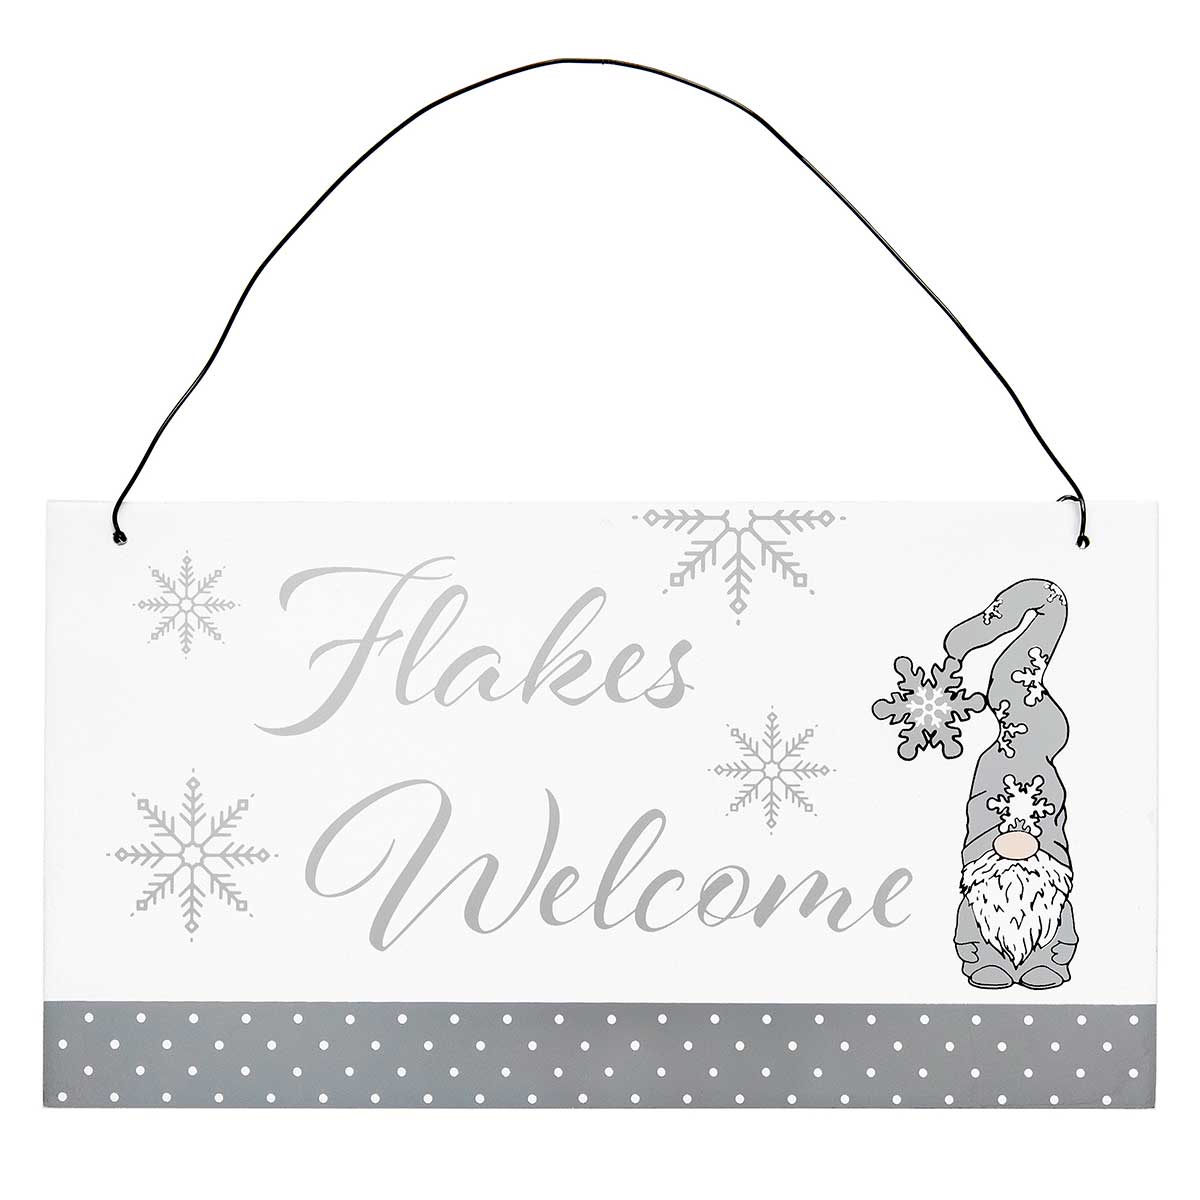 SIGN FLAKES WELCOME GNOME 8IN X .25IN X 4.25IN